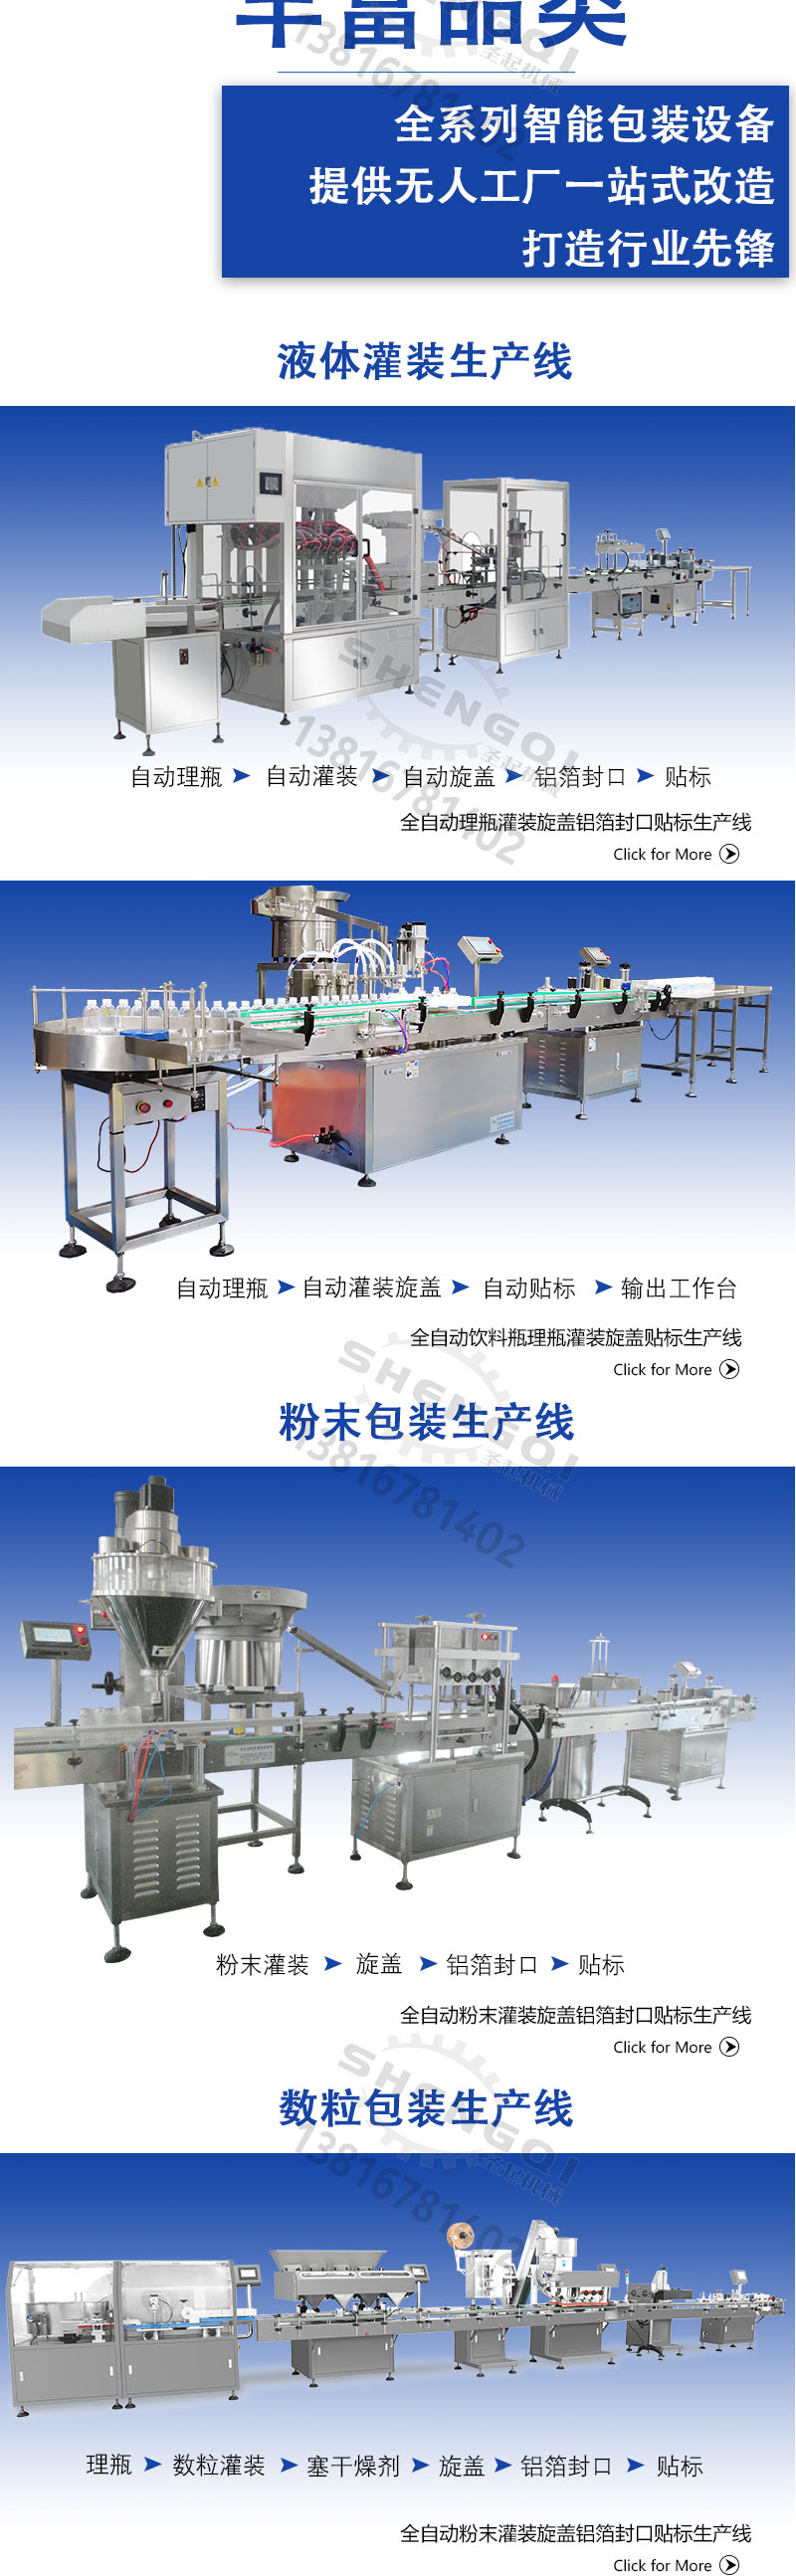 Automatic paper box filling machine manufacturer fully automatic drug box filling and health product box filling machine